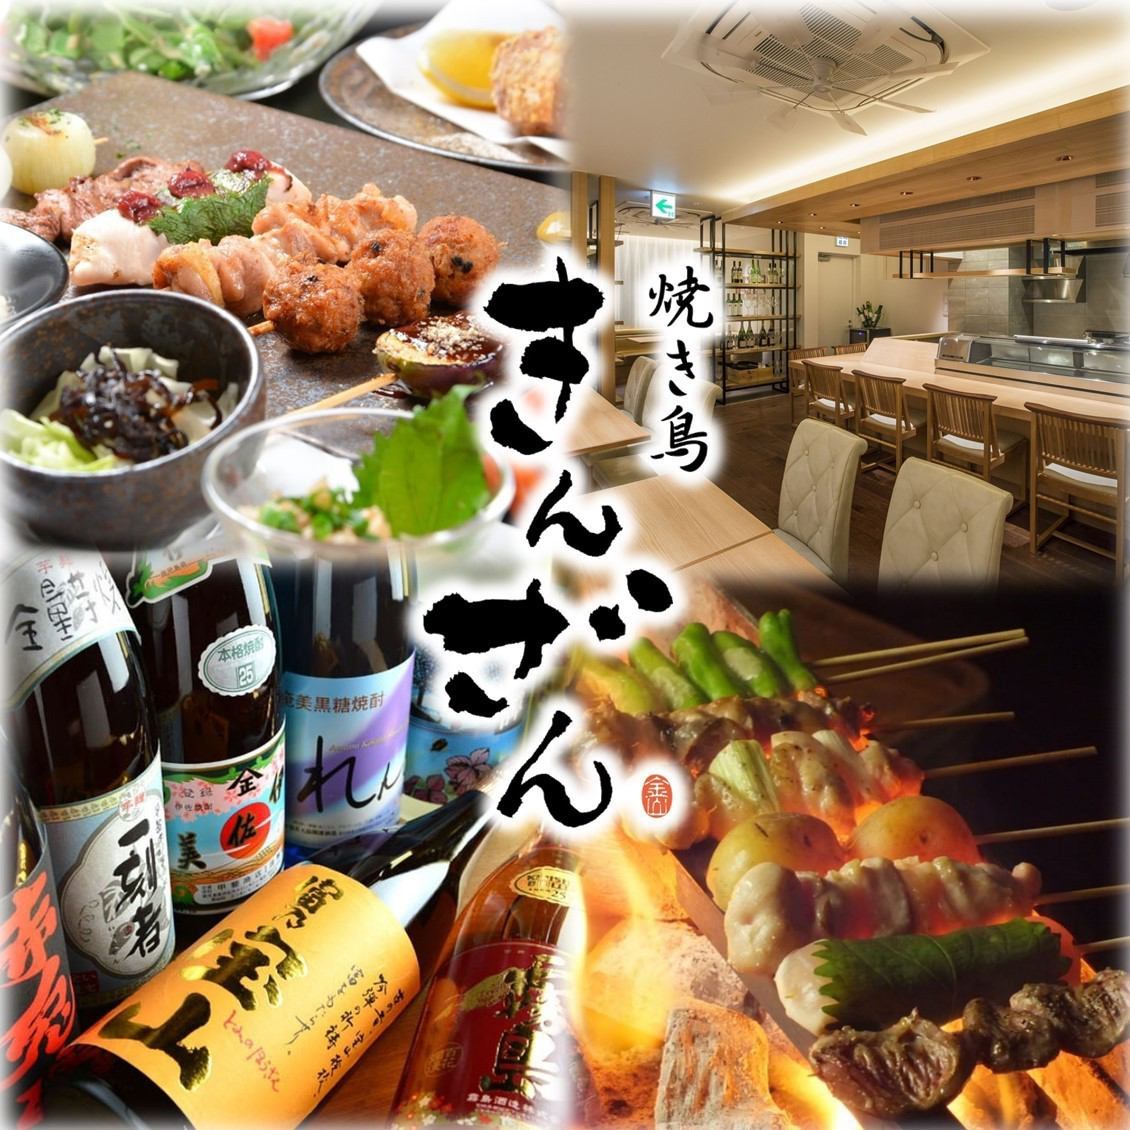 Speaking of yakitori in Nagoya, [Kinzan] A store that changes the concept of yakitori in famous station 4-chome!